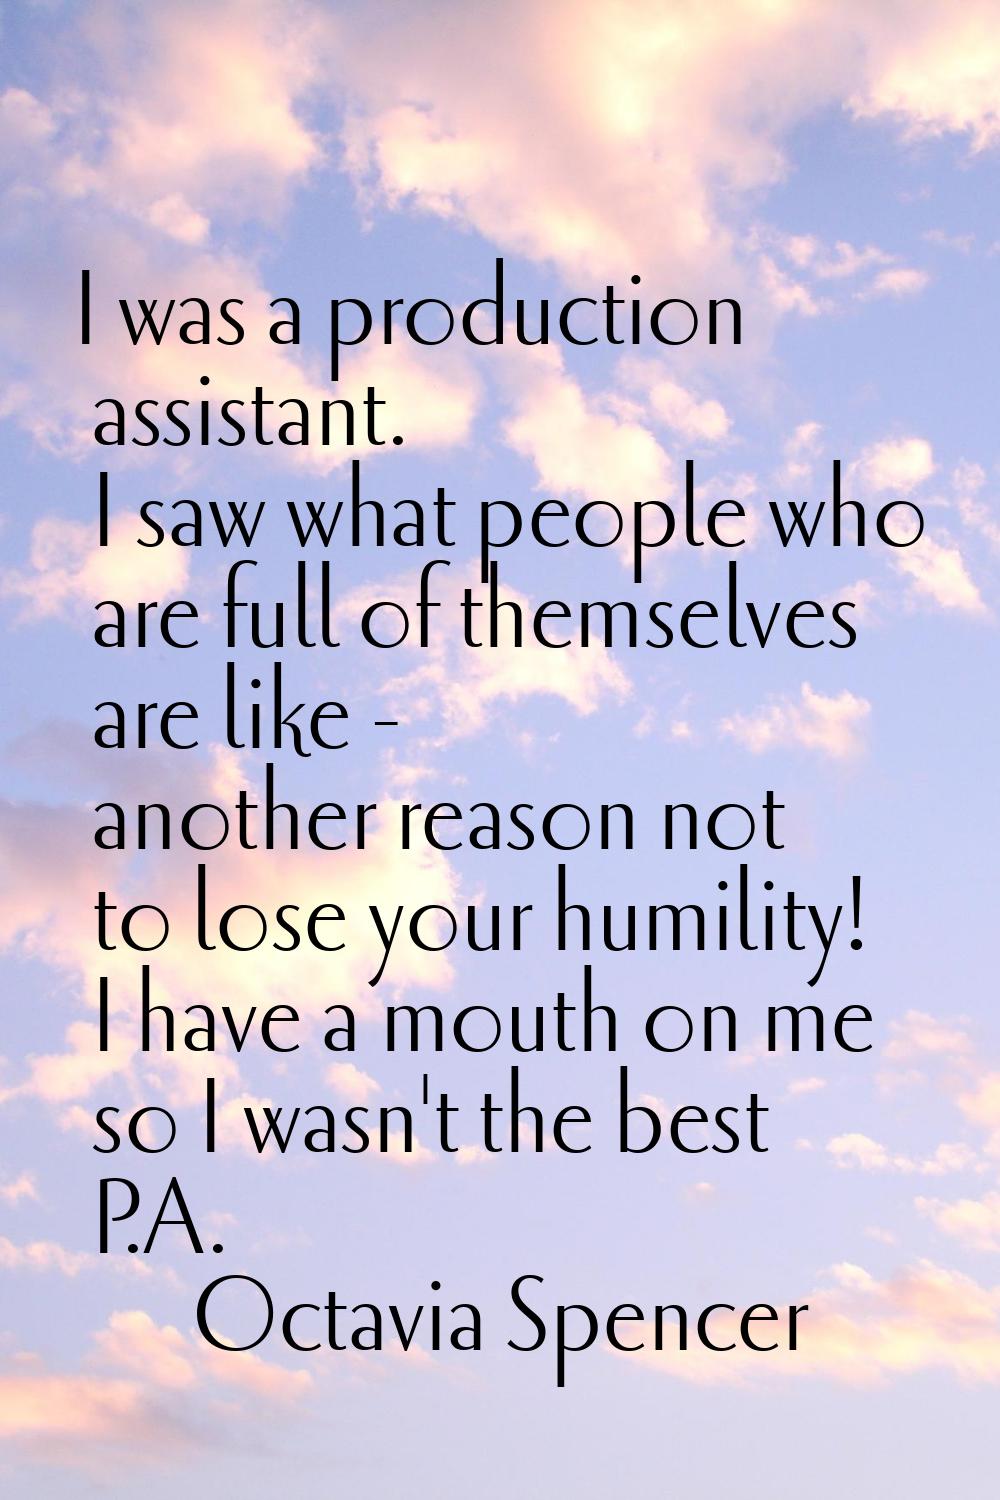 I was a production assistant. I saw what people who are full of themselves are like - another reaso